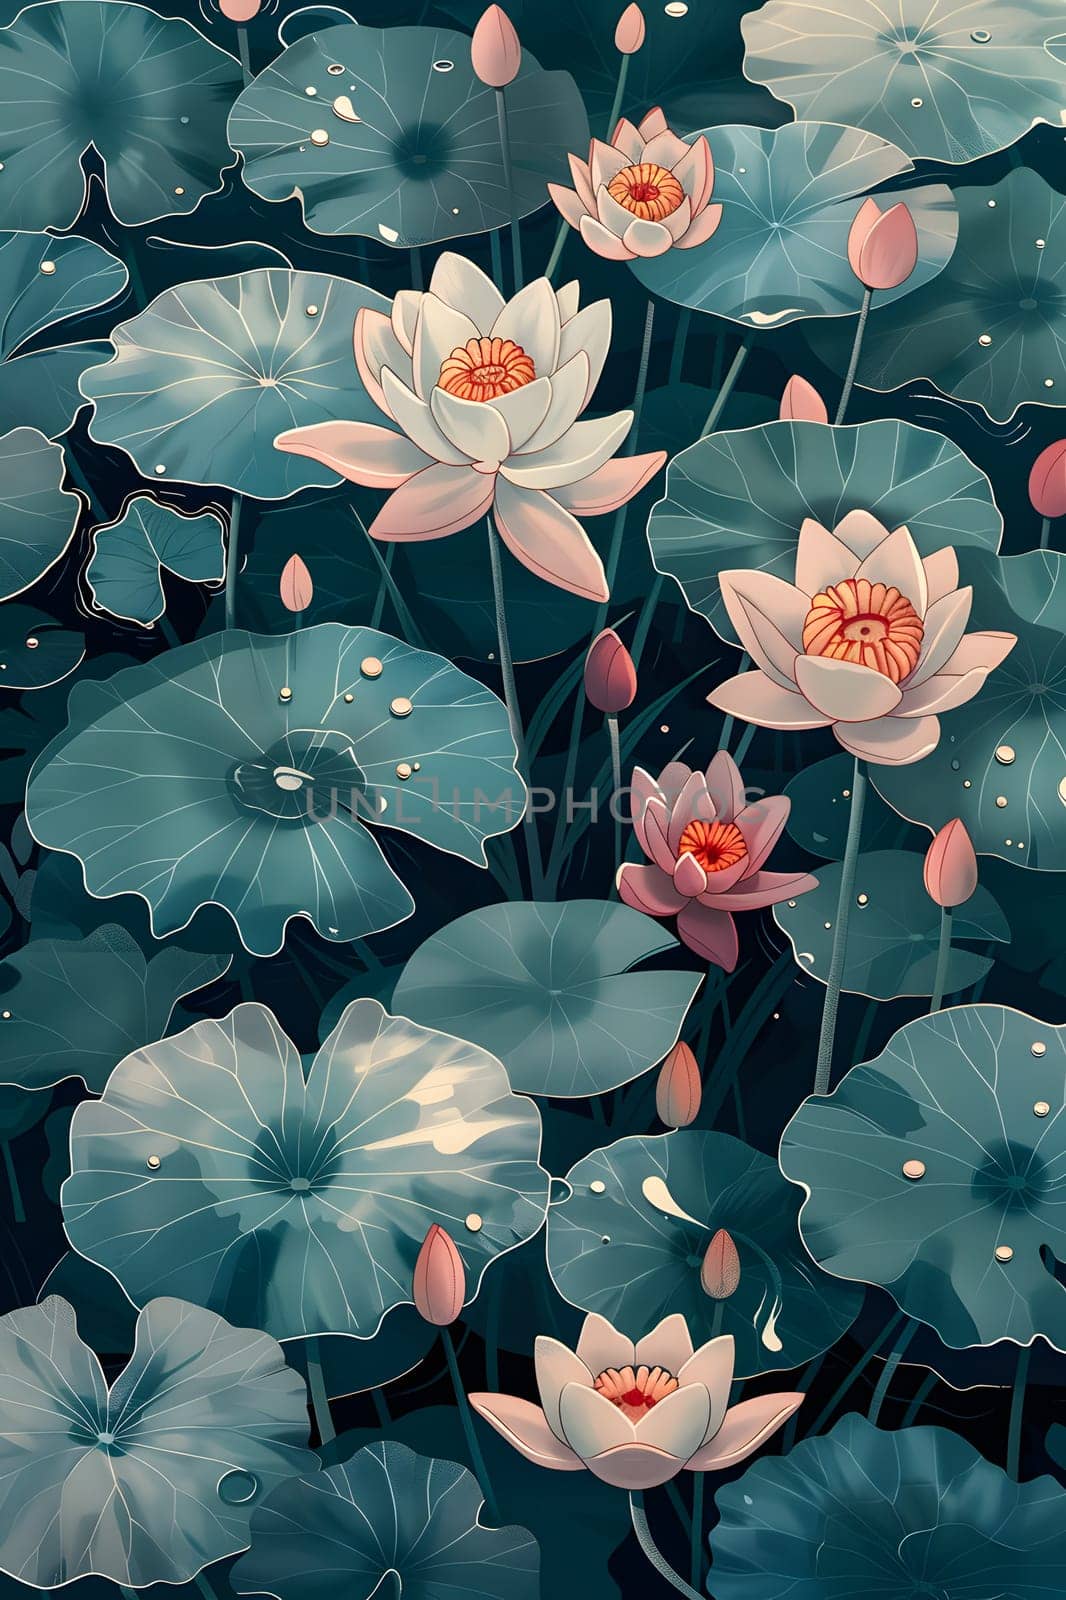 A beautiful painting featuring lotus flowers and lily pads floating on the serene surface of a pond, showcasing the harmony between terrestrial and aquatic plants